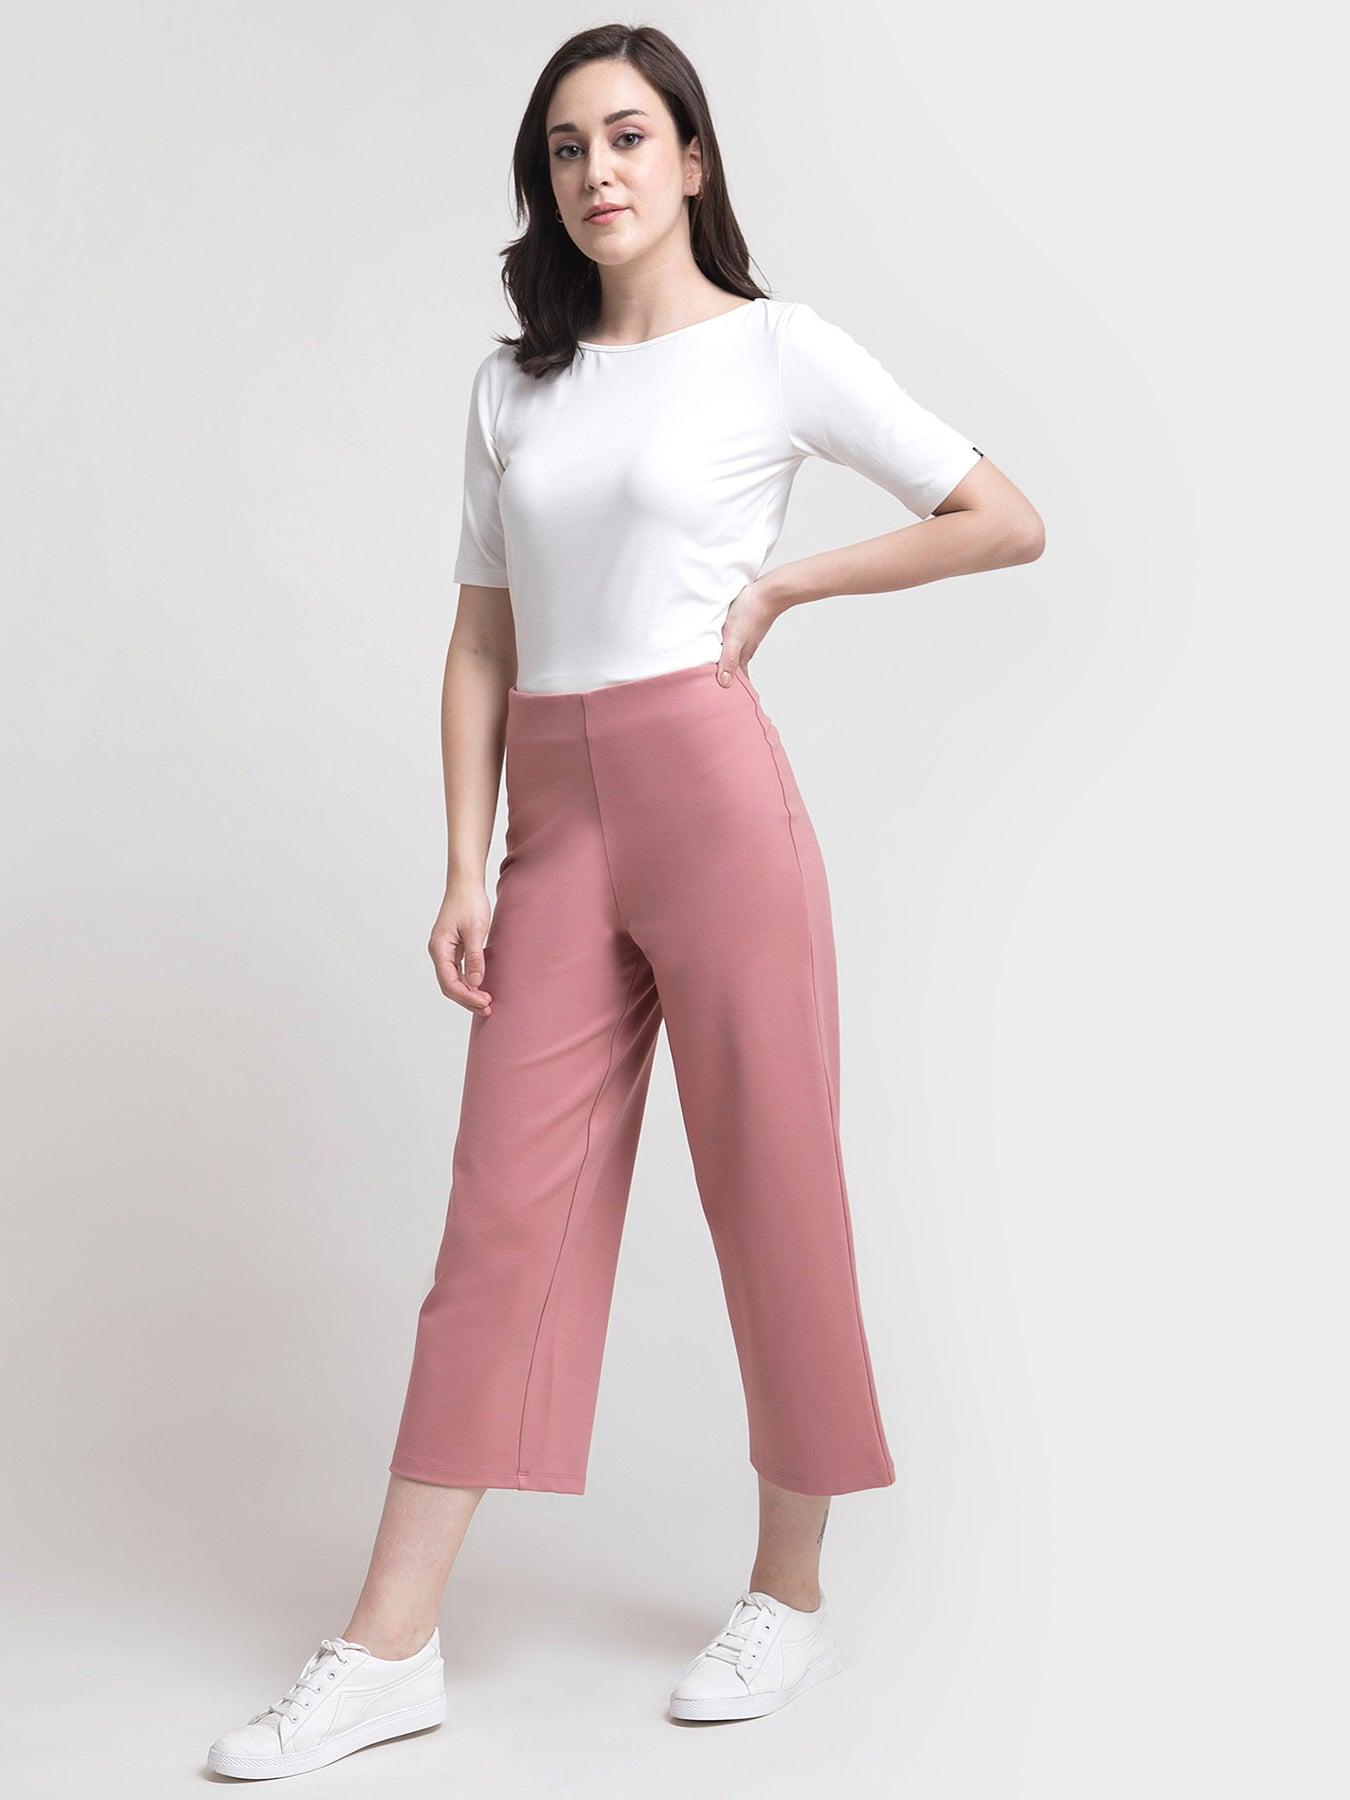 4 Way Stretch LivIn Culottes - Pink| Formal Trousers